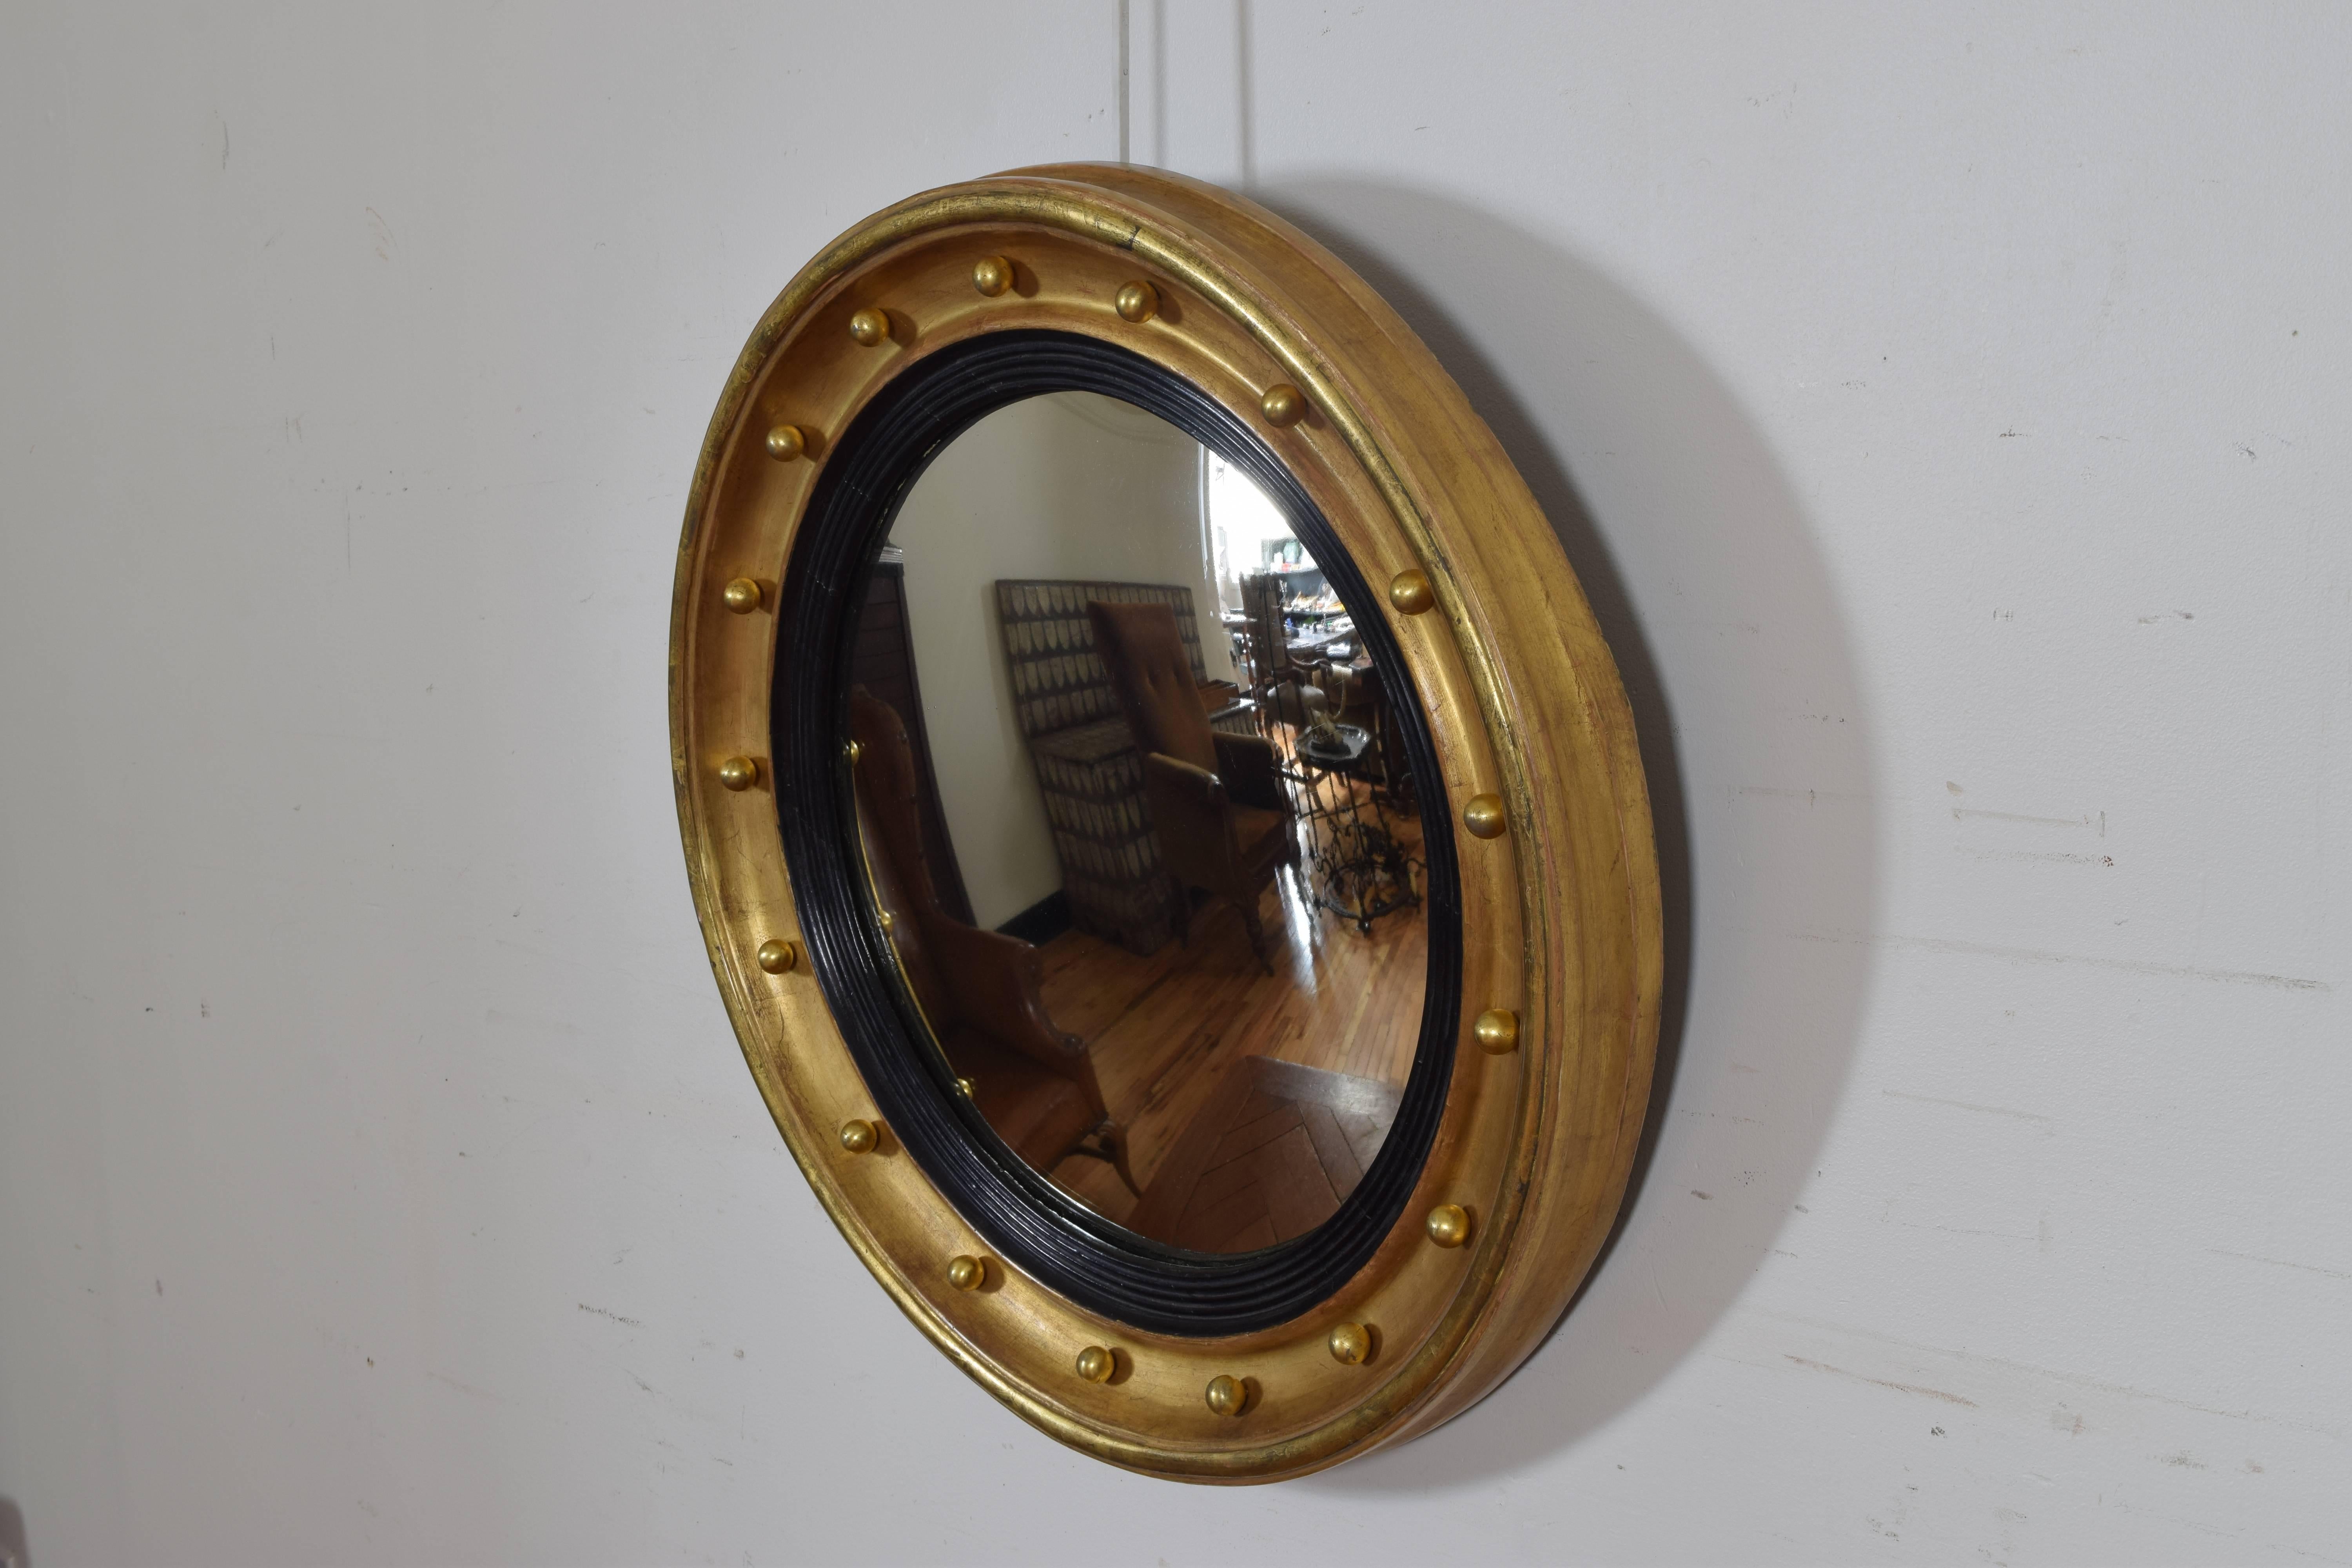 The round frame with molded edges and having gilded spheres along the interior convex scoop, the inner edge of ebonized molded wood, retaining original convex mirrorplate.